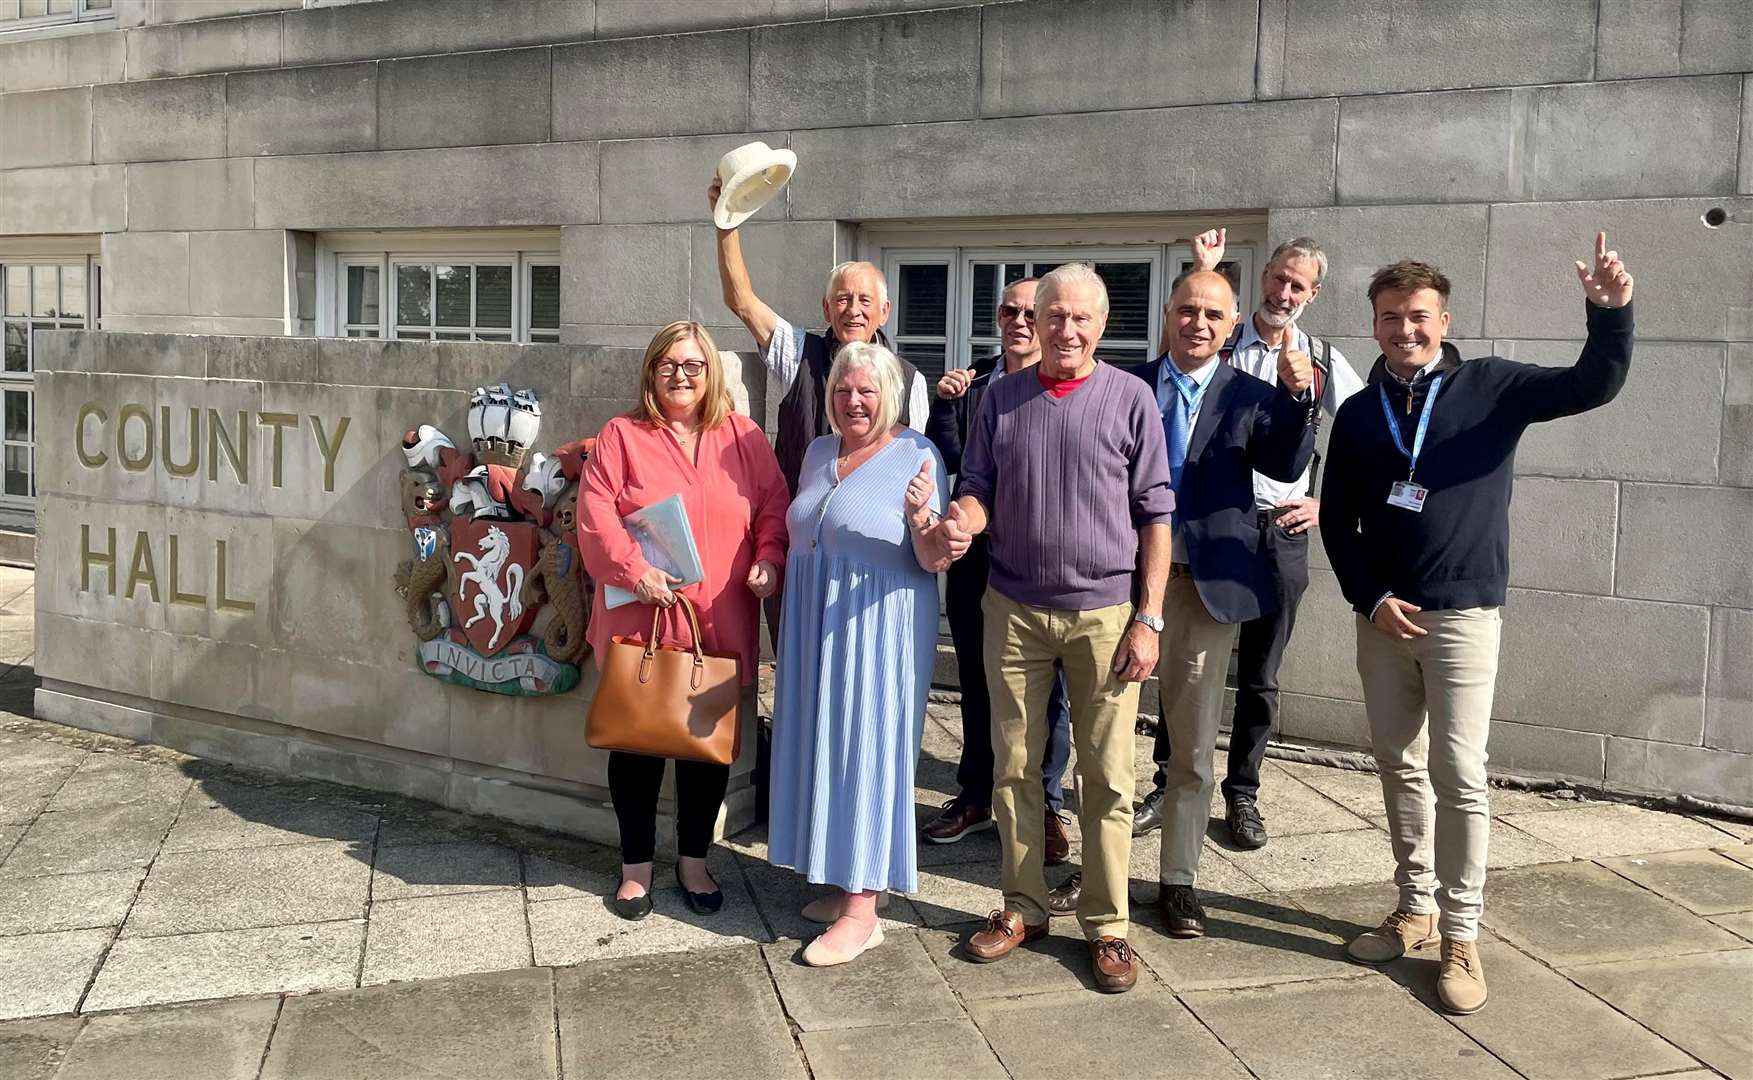 The village green campaigners after the meeting: from left, Alison Bundock, Keith Young, Lynne Lawrence, Mark Bundock, Peter Lawrence, Cllr Chris Passmore, Duncan Edwards, Cllr Tom Cannon